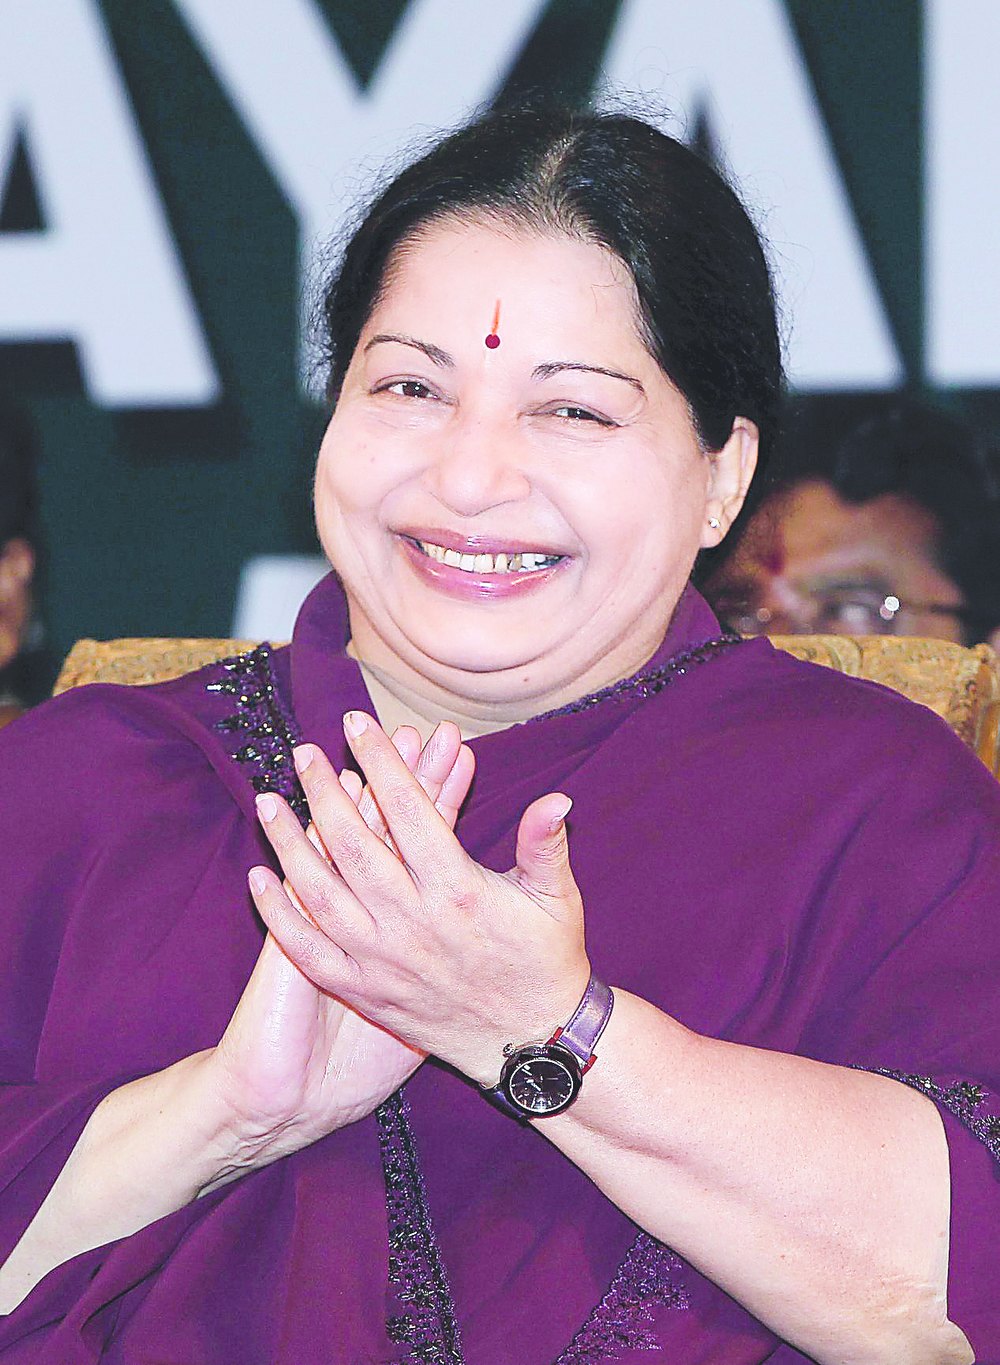 AIADMK's stand on J&K in syncwith Jayalalithaa's 1984 speech - The Hindu